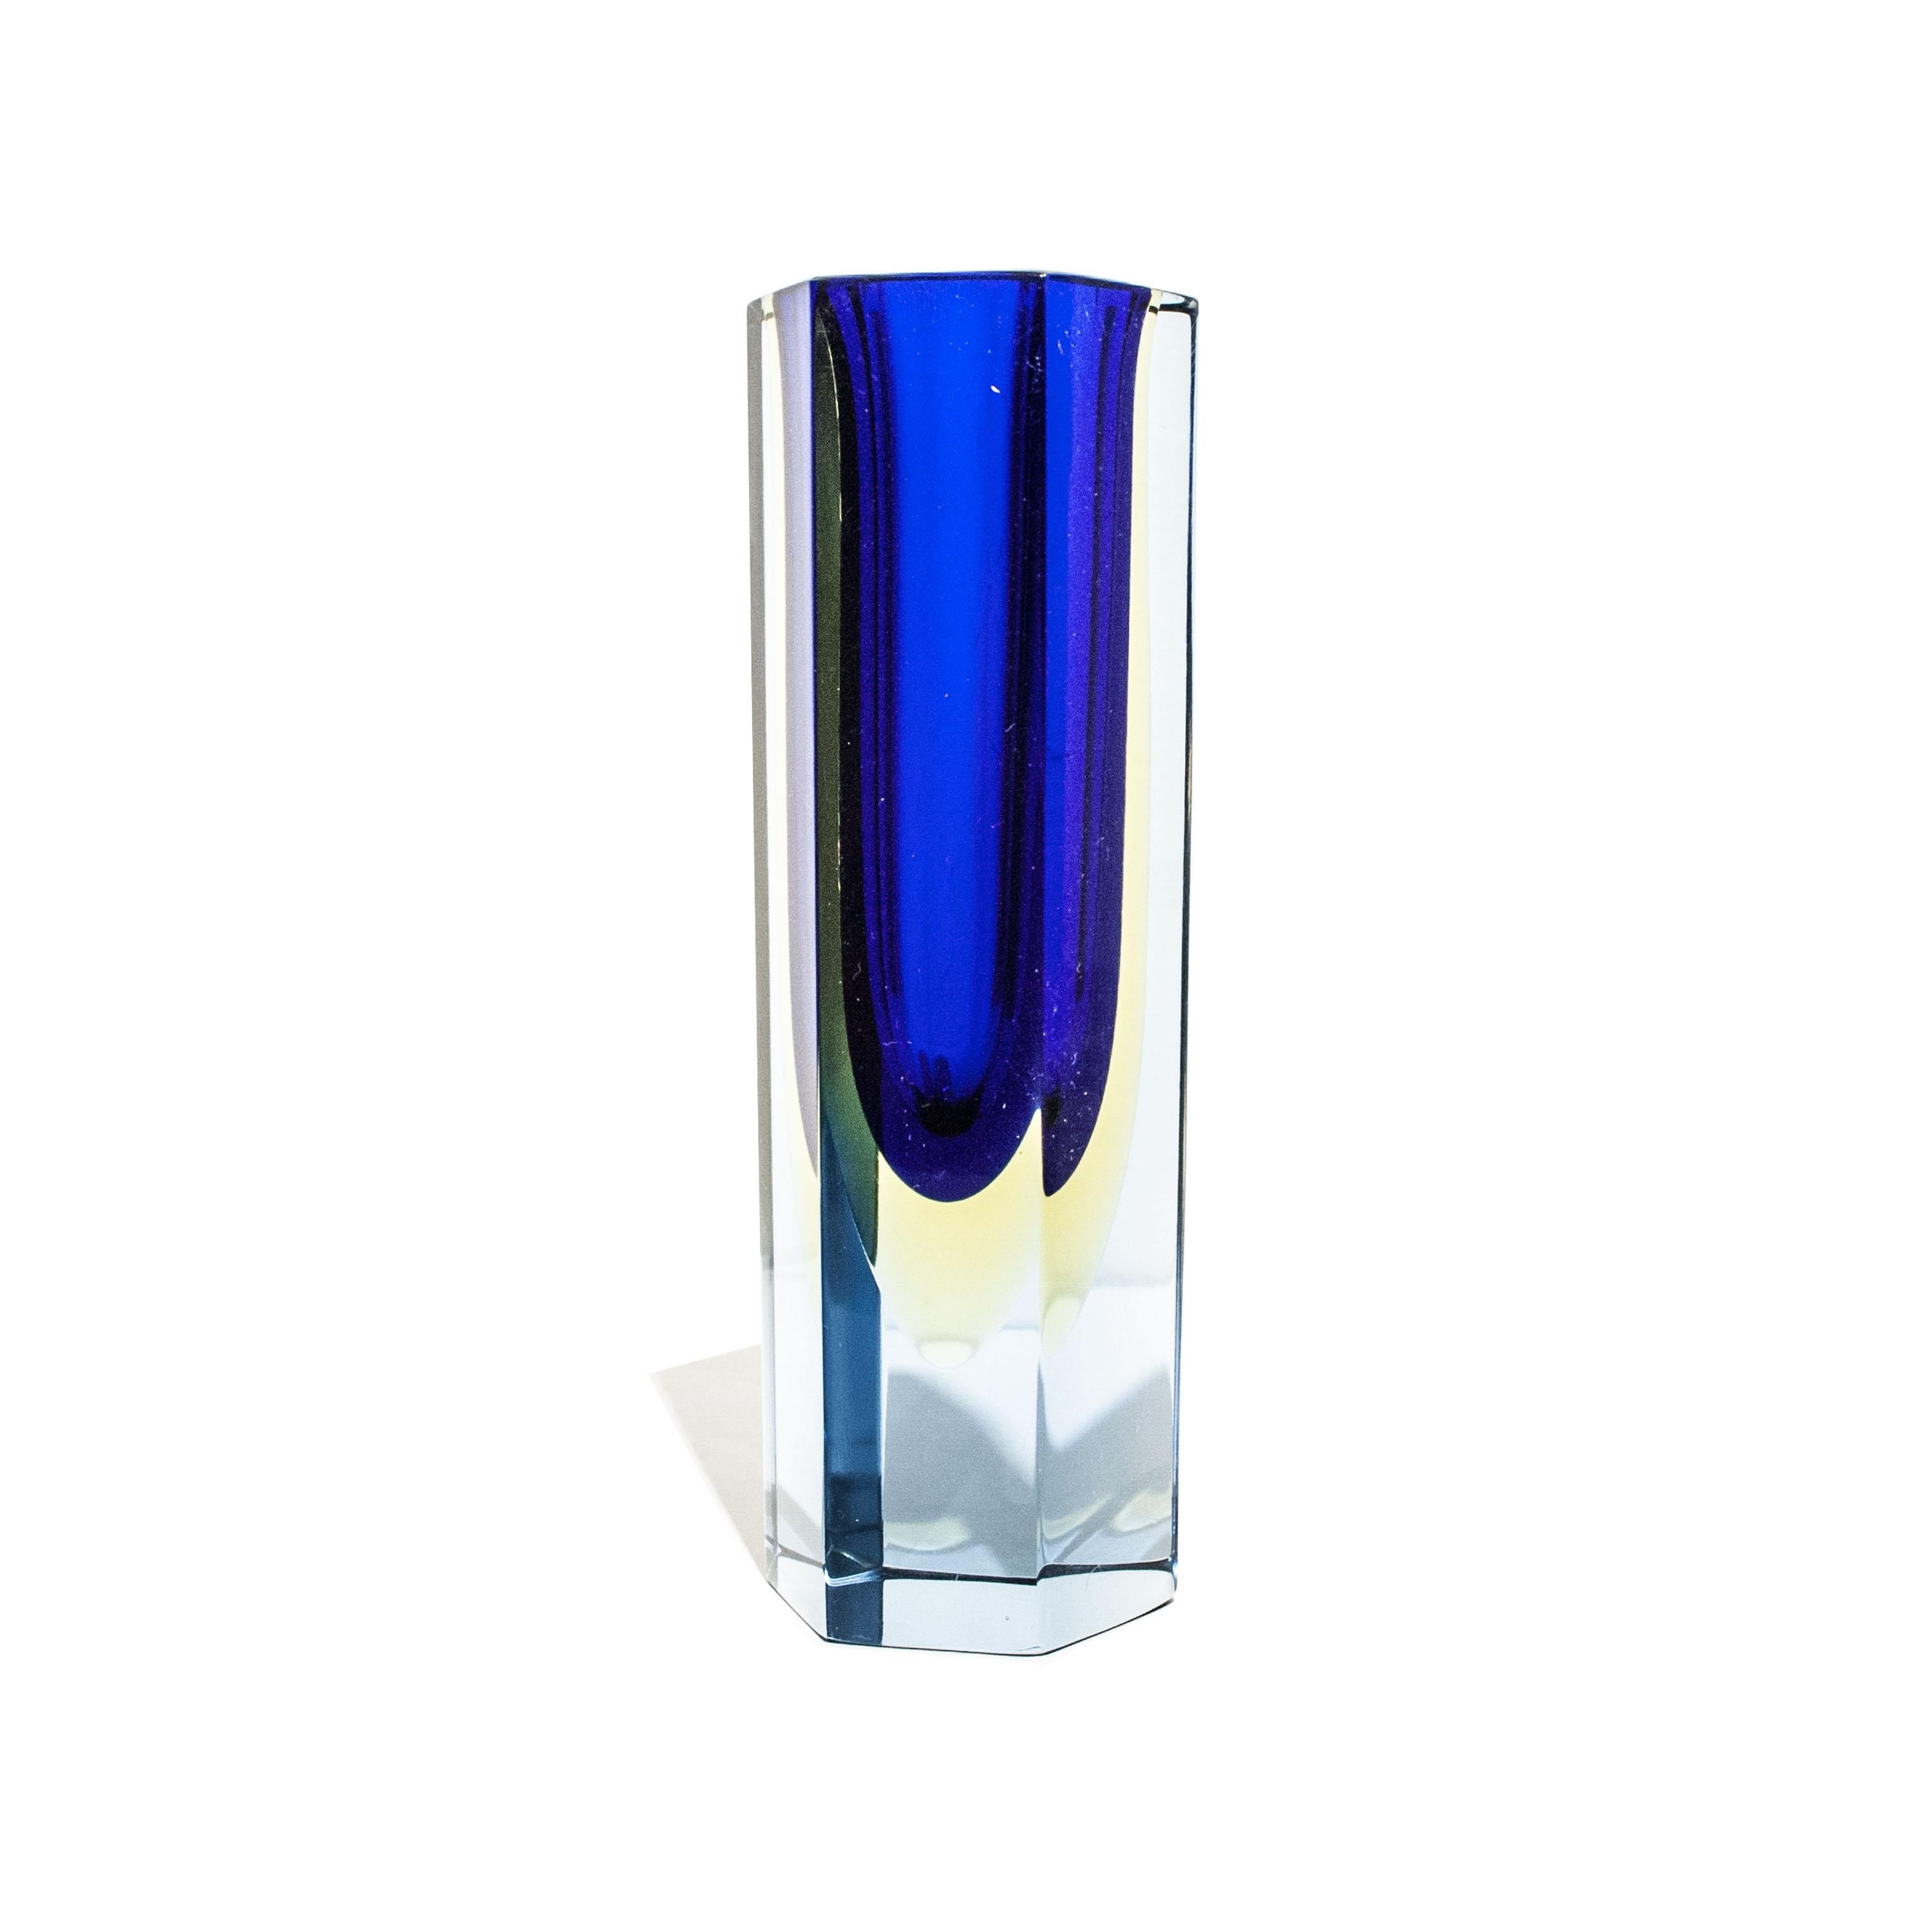 Italian small vase designed by Flavio Poli in the 1970´s. The vase is hand-crafted in faceted Murano glass in different colors with predominant blue.